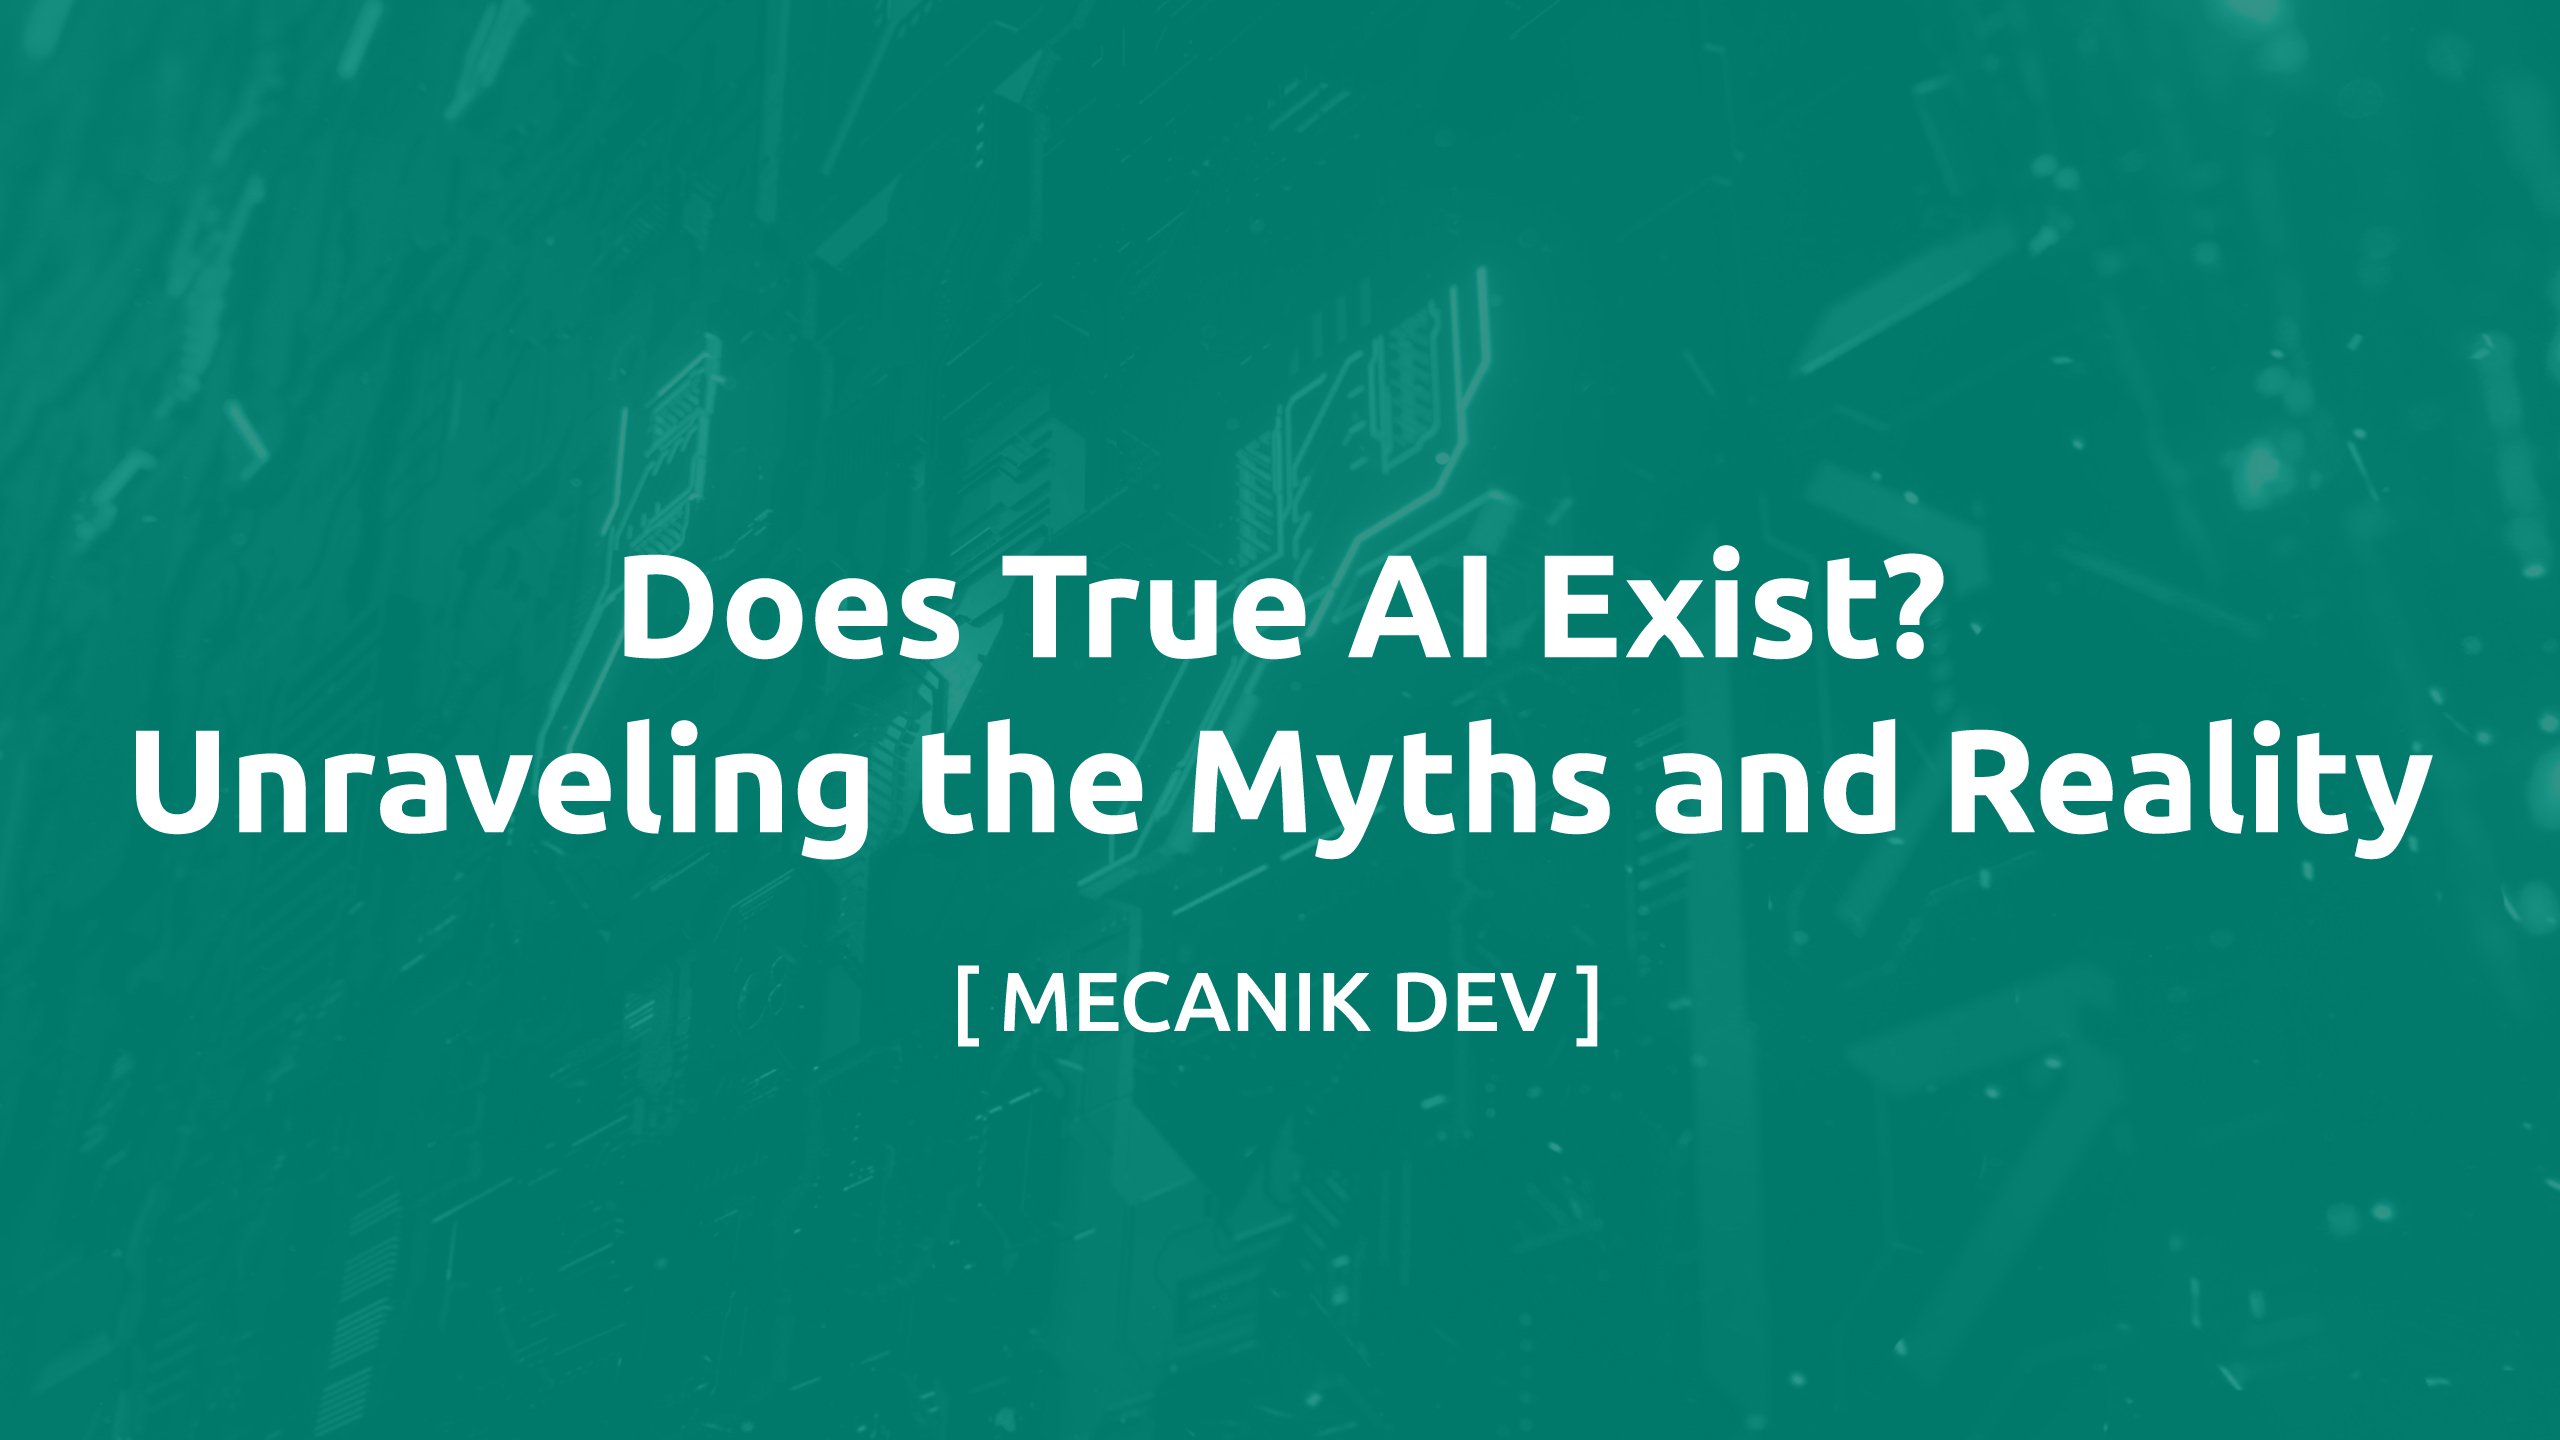 Does True AI Exist? Unraveling the Myths and Reality